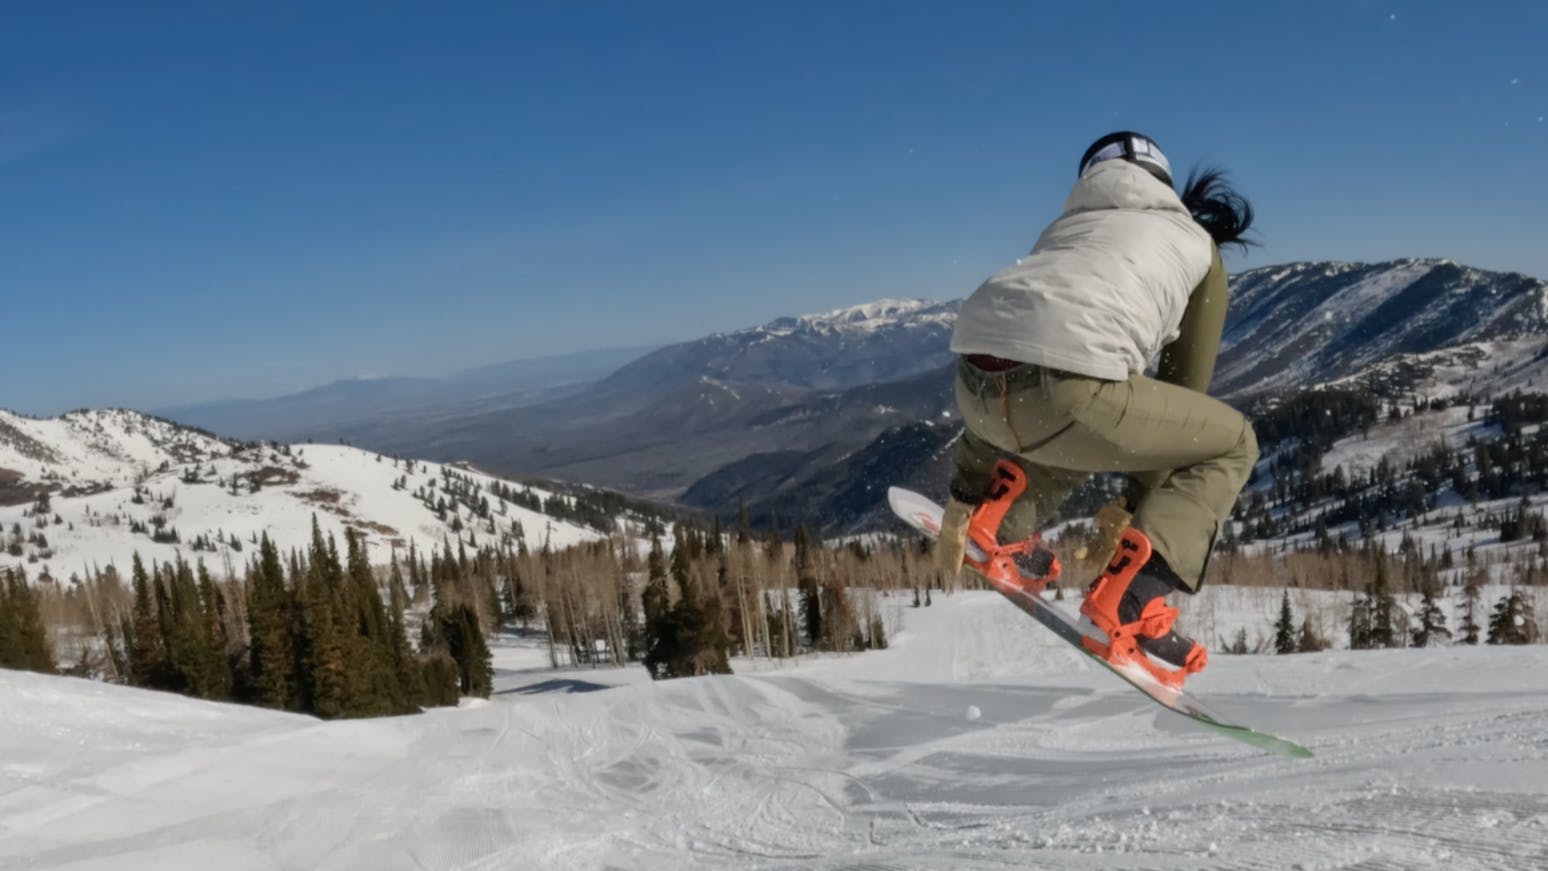 A snowboarder on the 2023 Bataleon Disaster Snowboard.